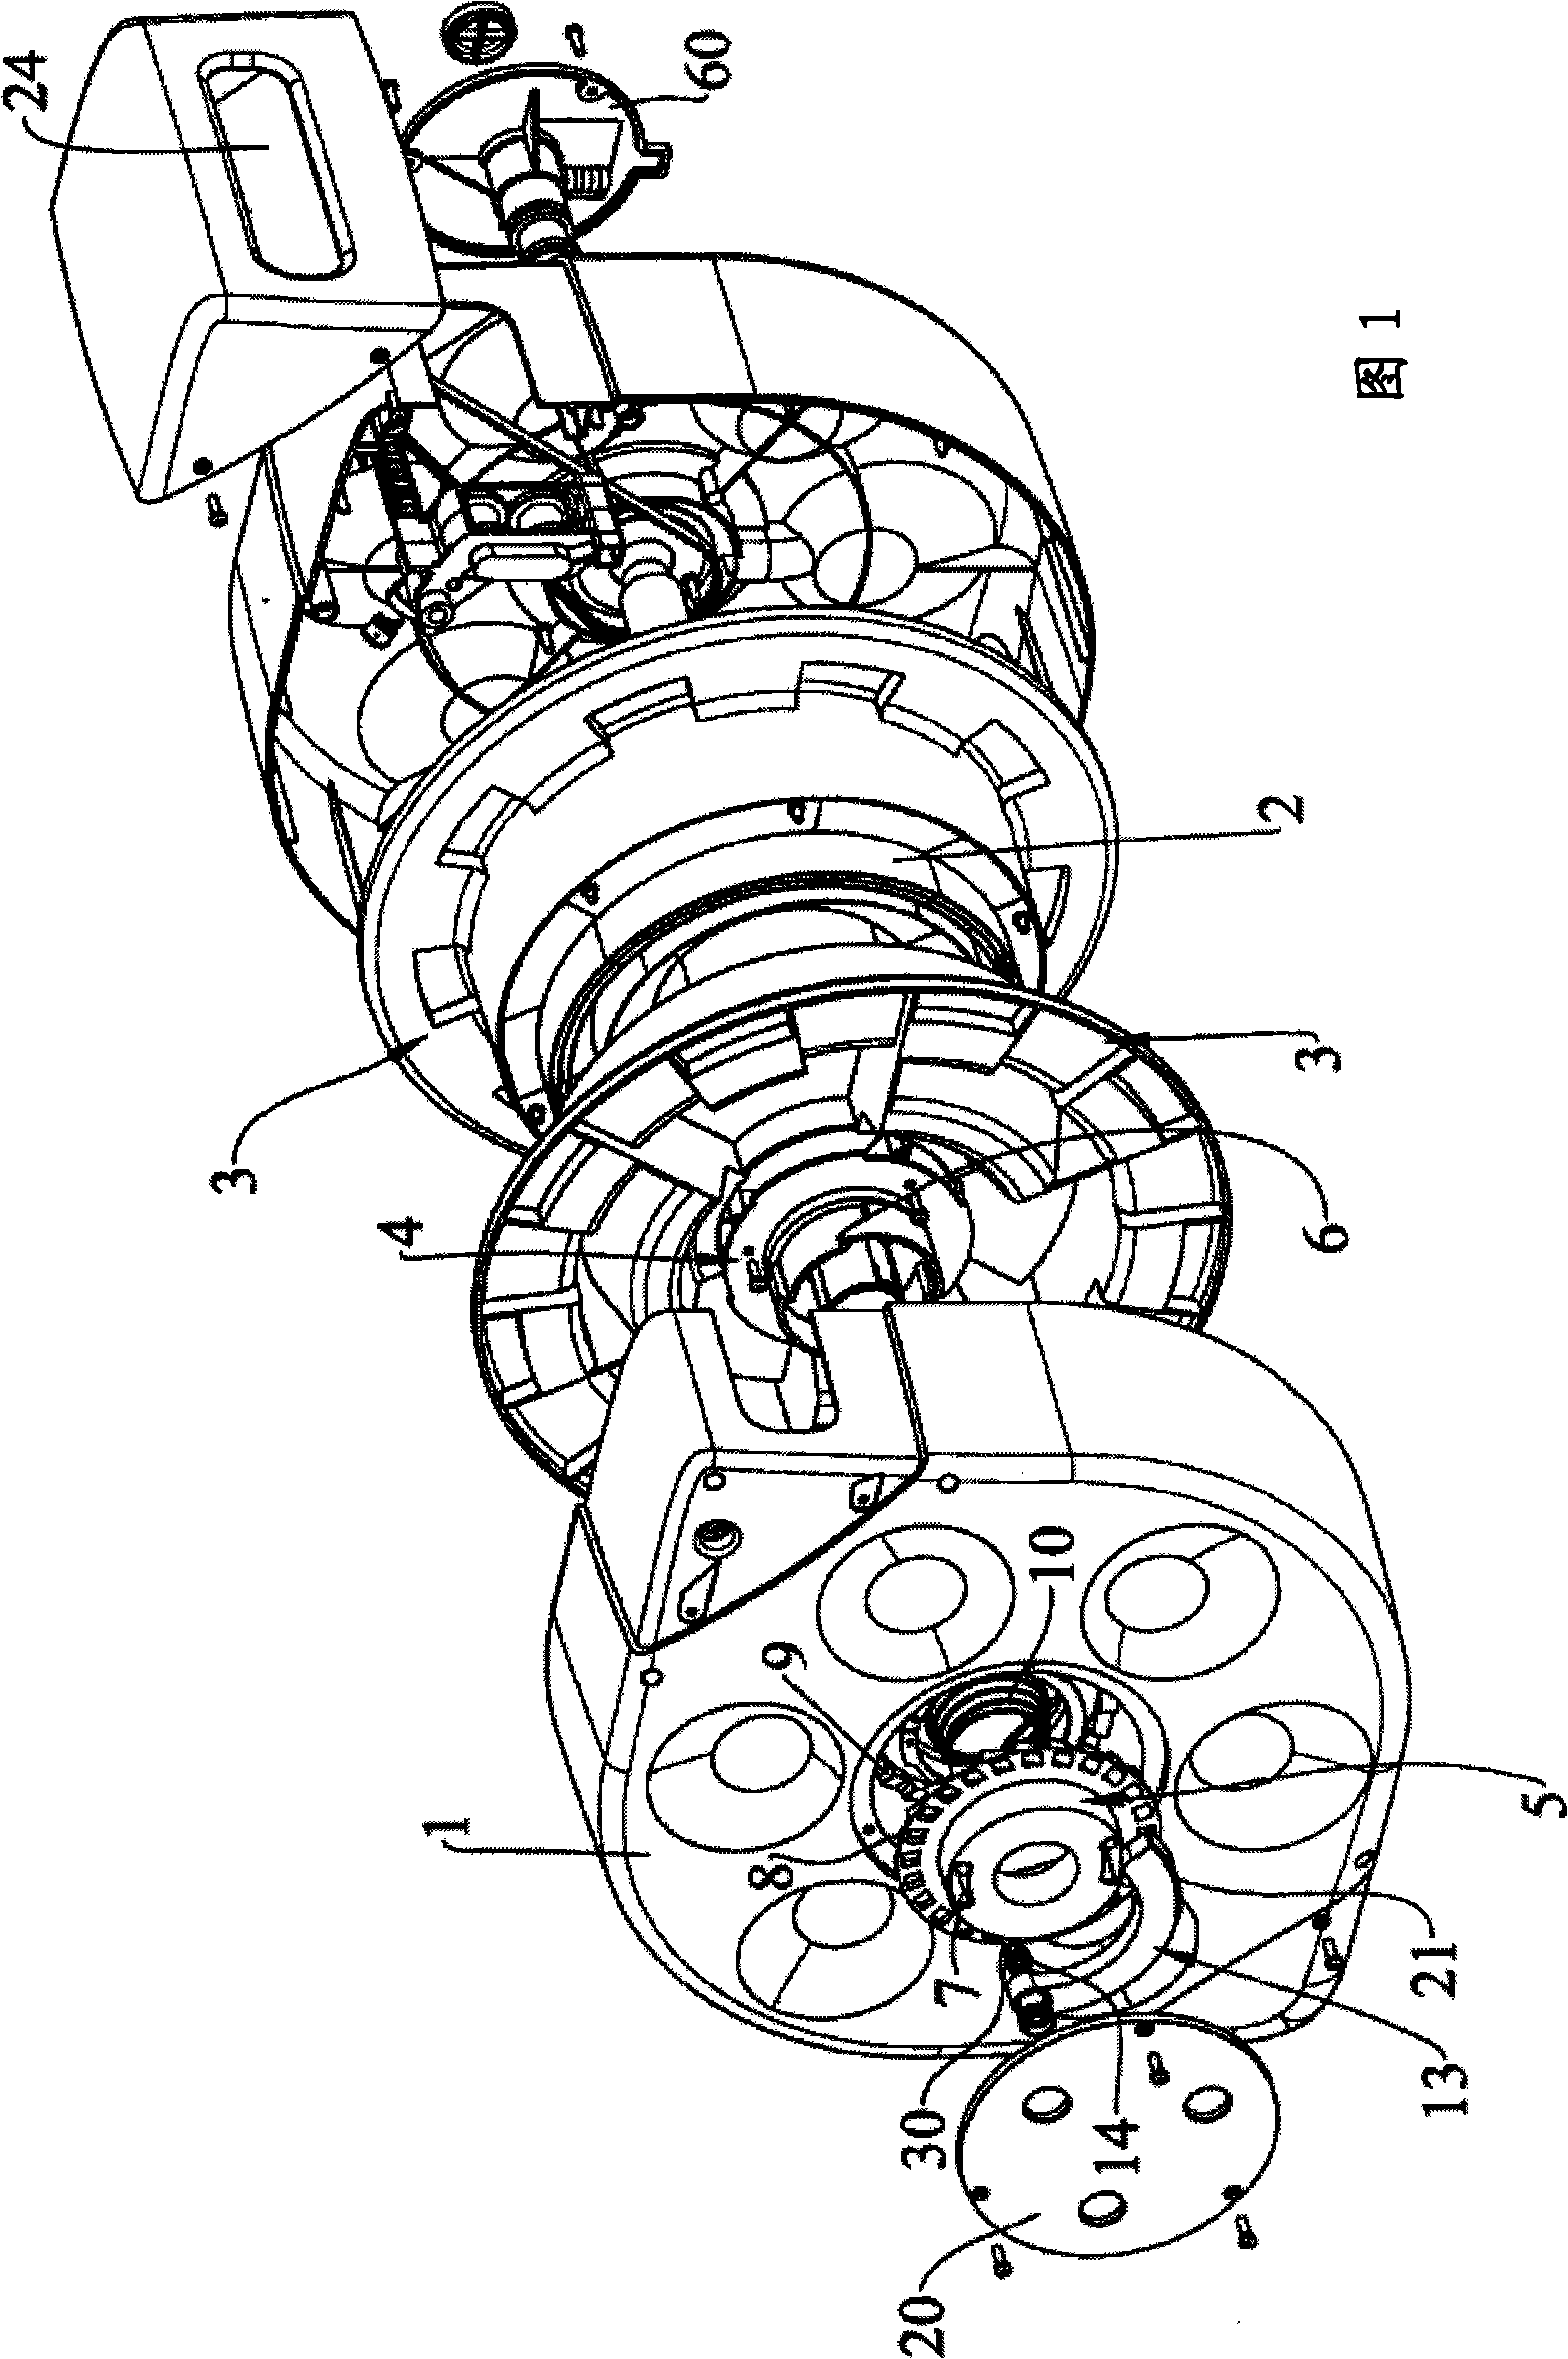 Elastic rewinding hose reel with automatic stopping device